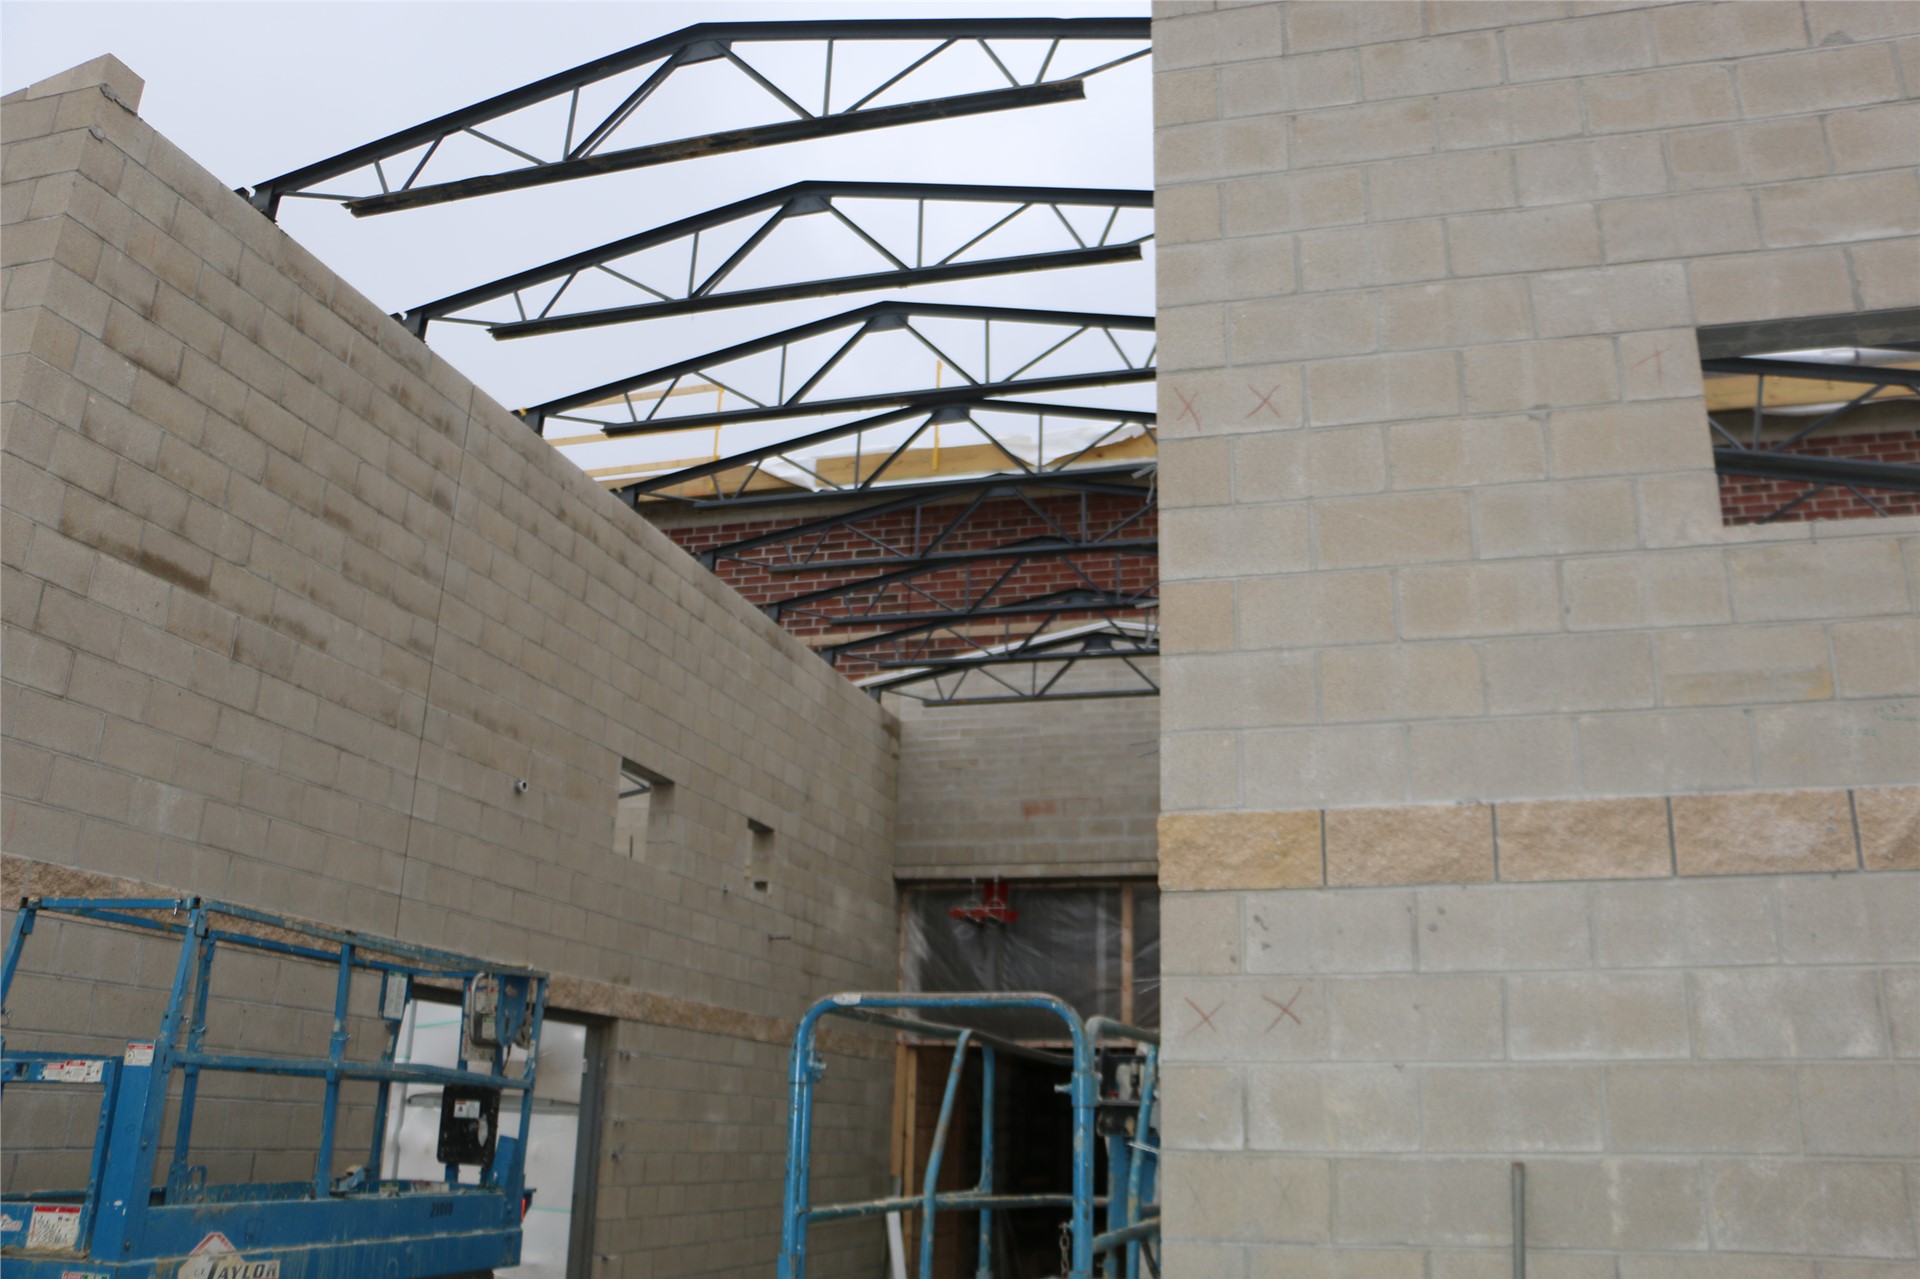 Exterior brick is in place above main corridor connecting the central rotunda to the academic wing